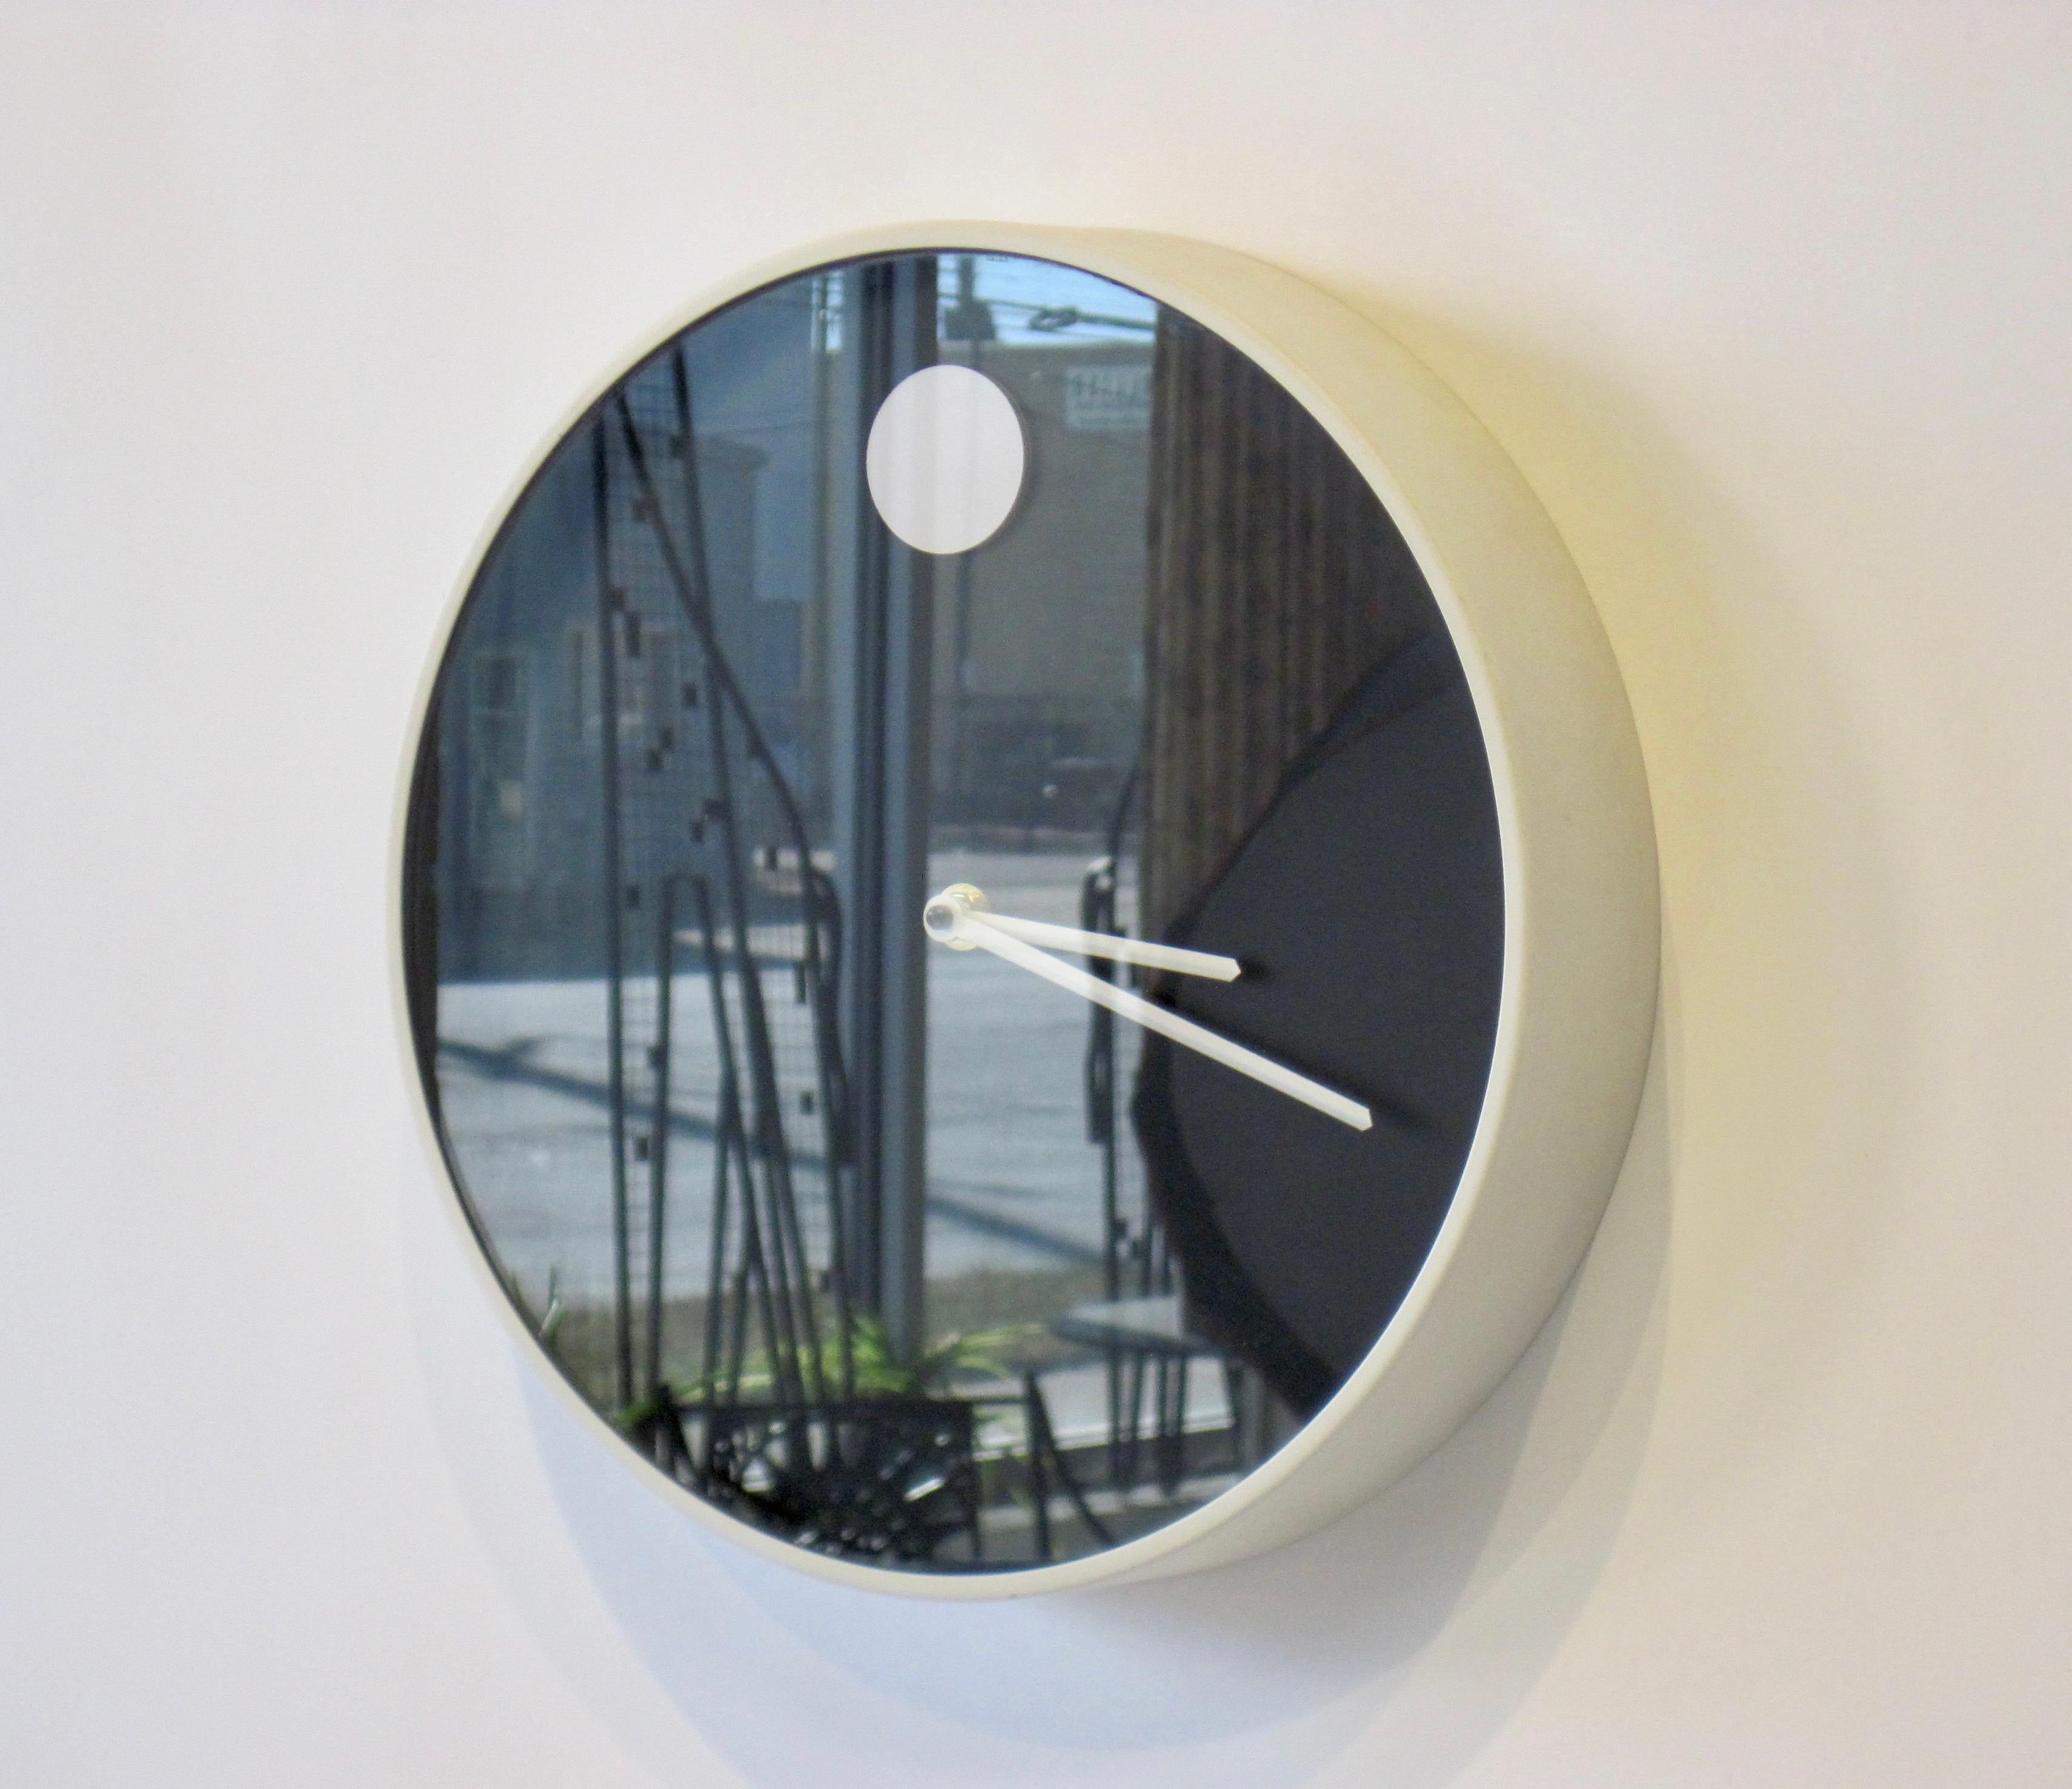 Mid-Century Modern museum wall clock designed by Nathan George Horwitt for Howard Miller Clock Company, Zeeland Michigan.
Movado style Minimalist design in black and white. The outer casing is enameled in eggshell white with a black face with white